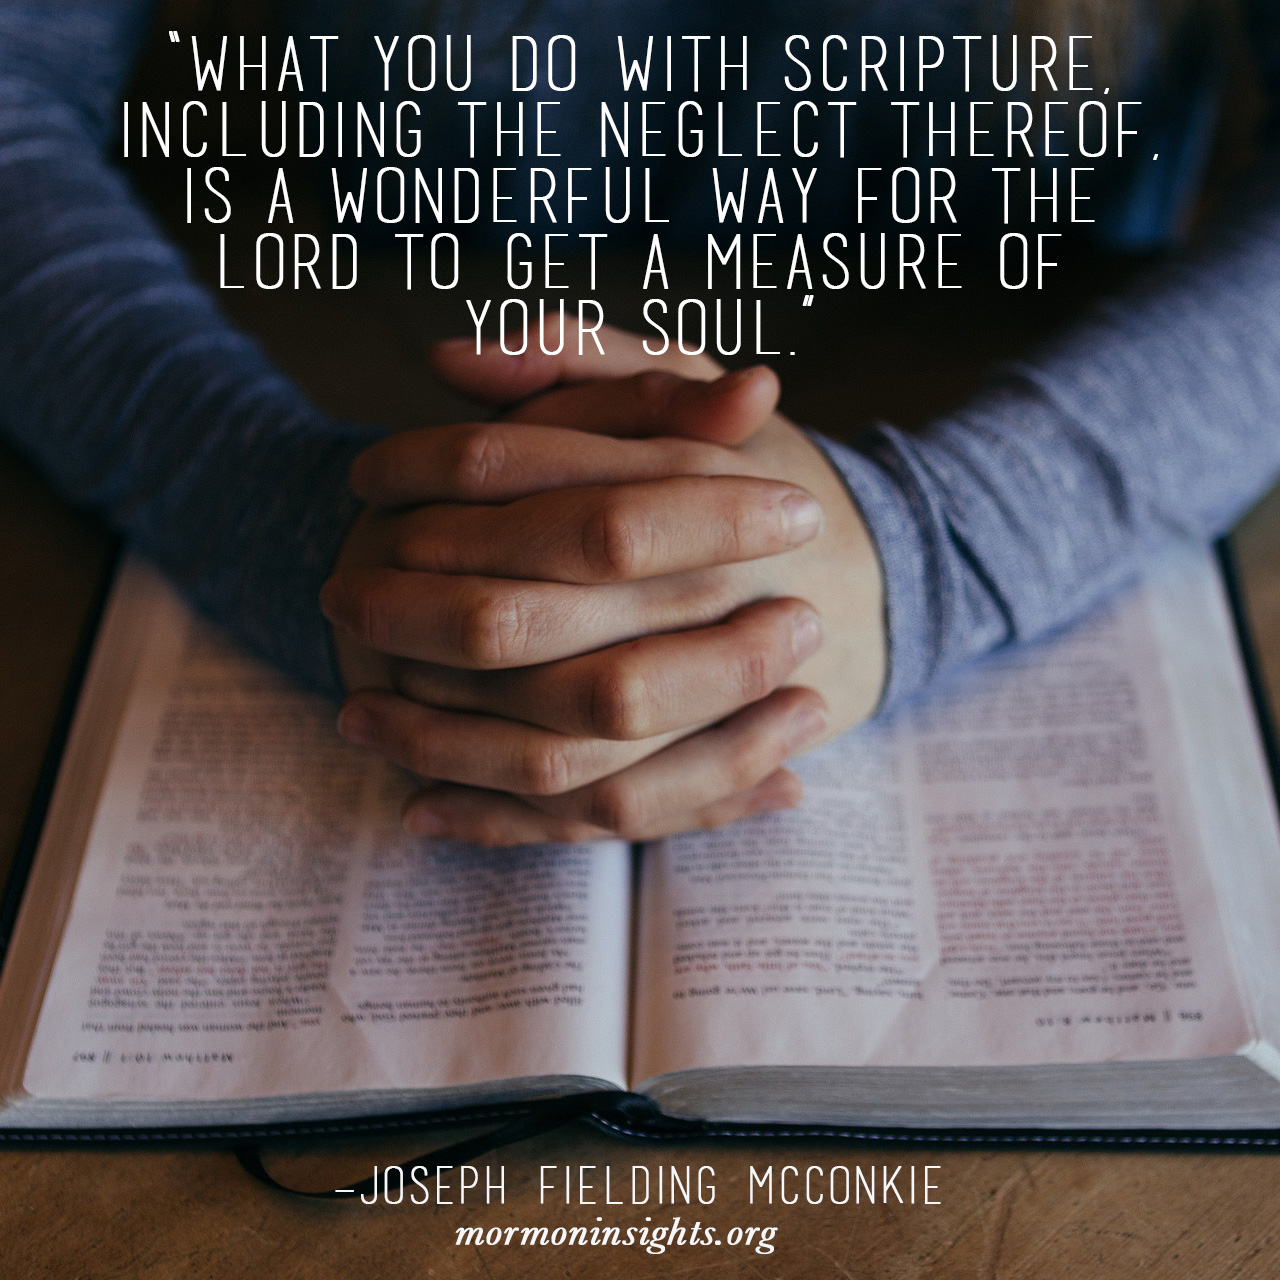 "What you do with scripture, including the neglect thereof, is a wonderful way for the Lord to get a measure of your soul." - Joseph Fielding McConkie